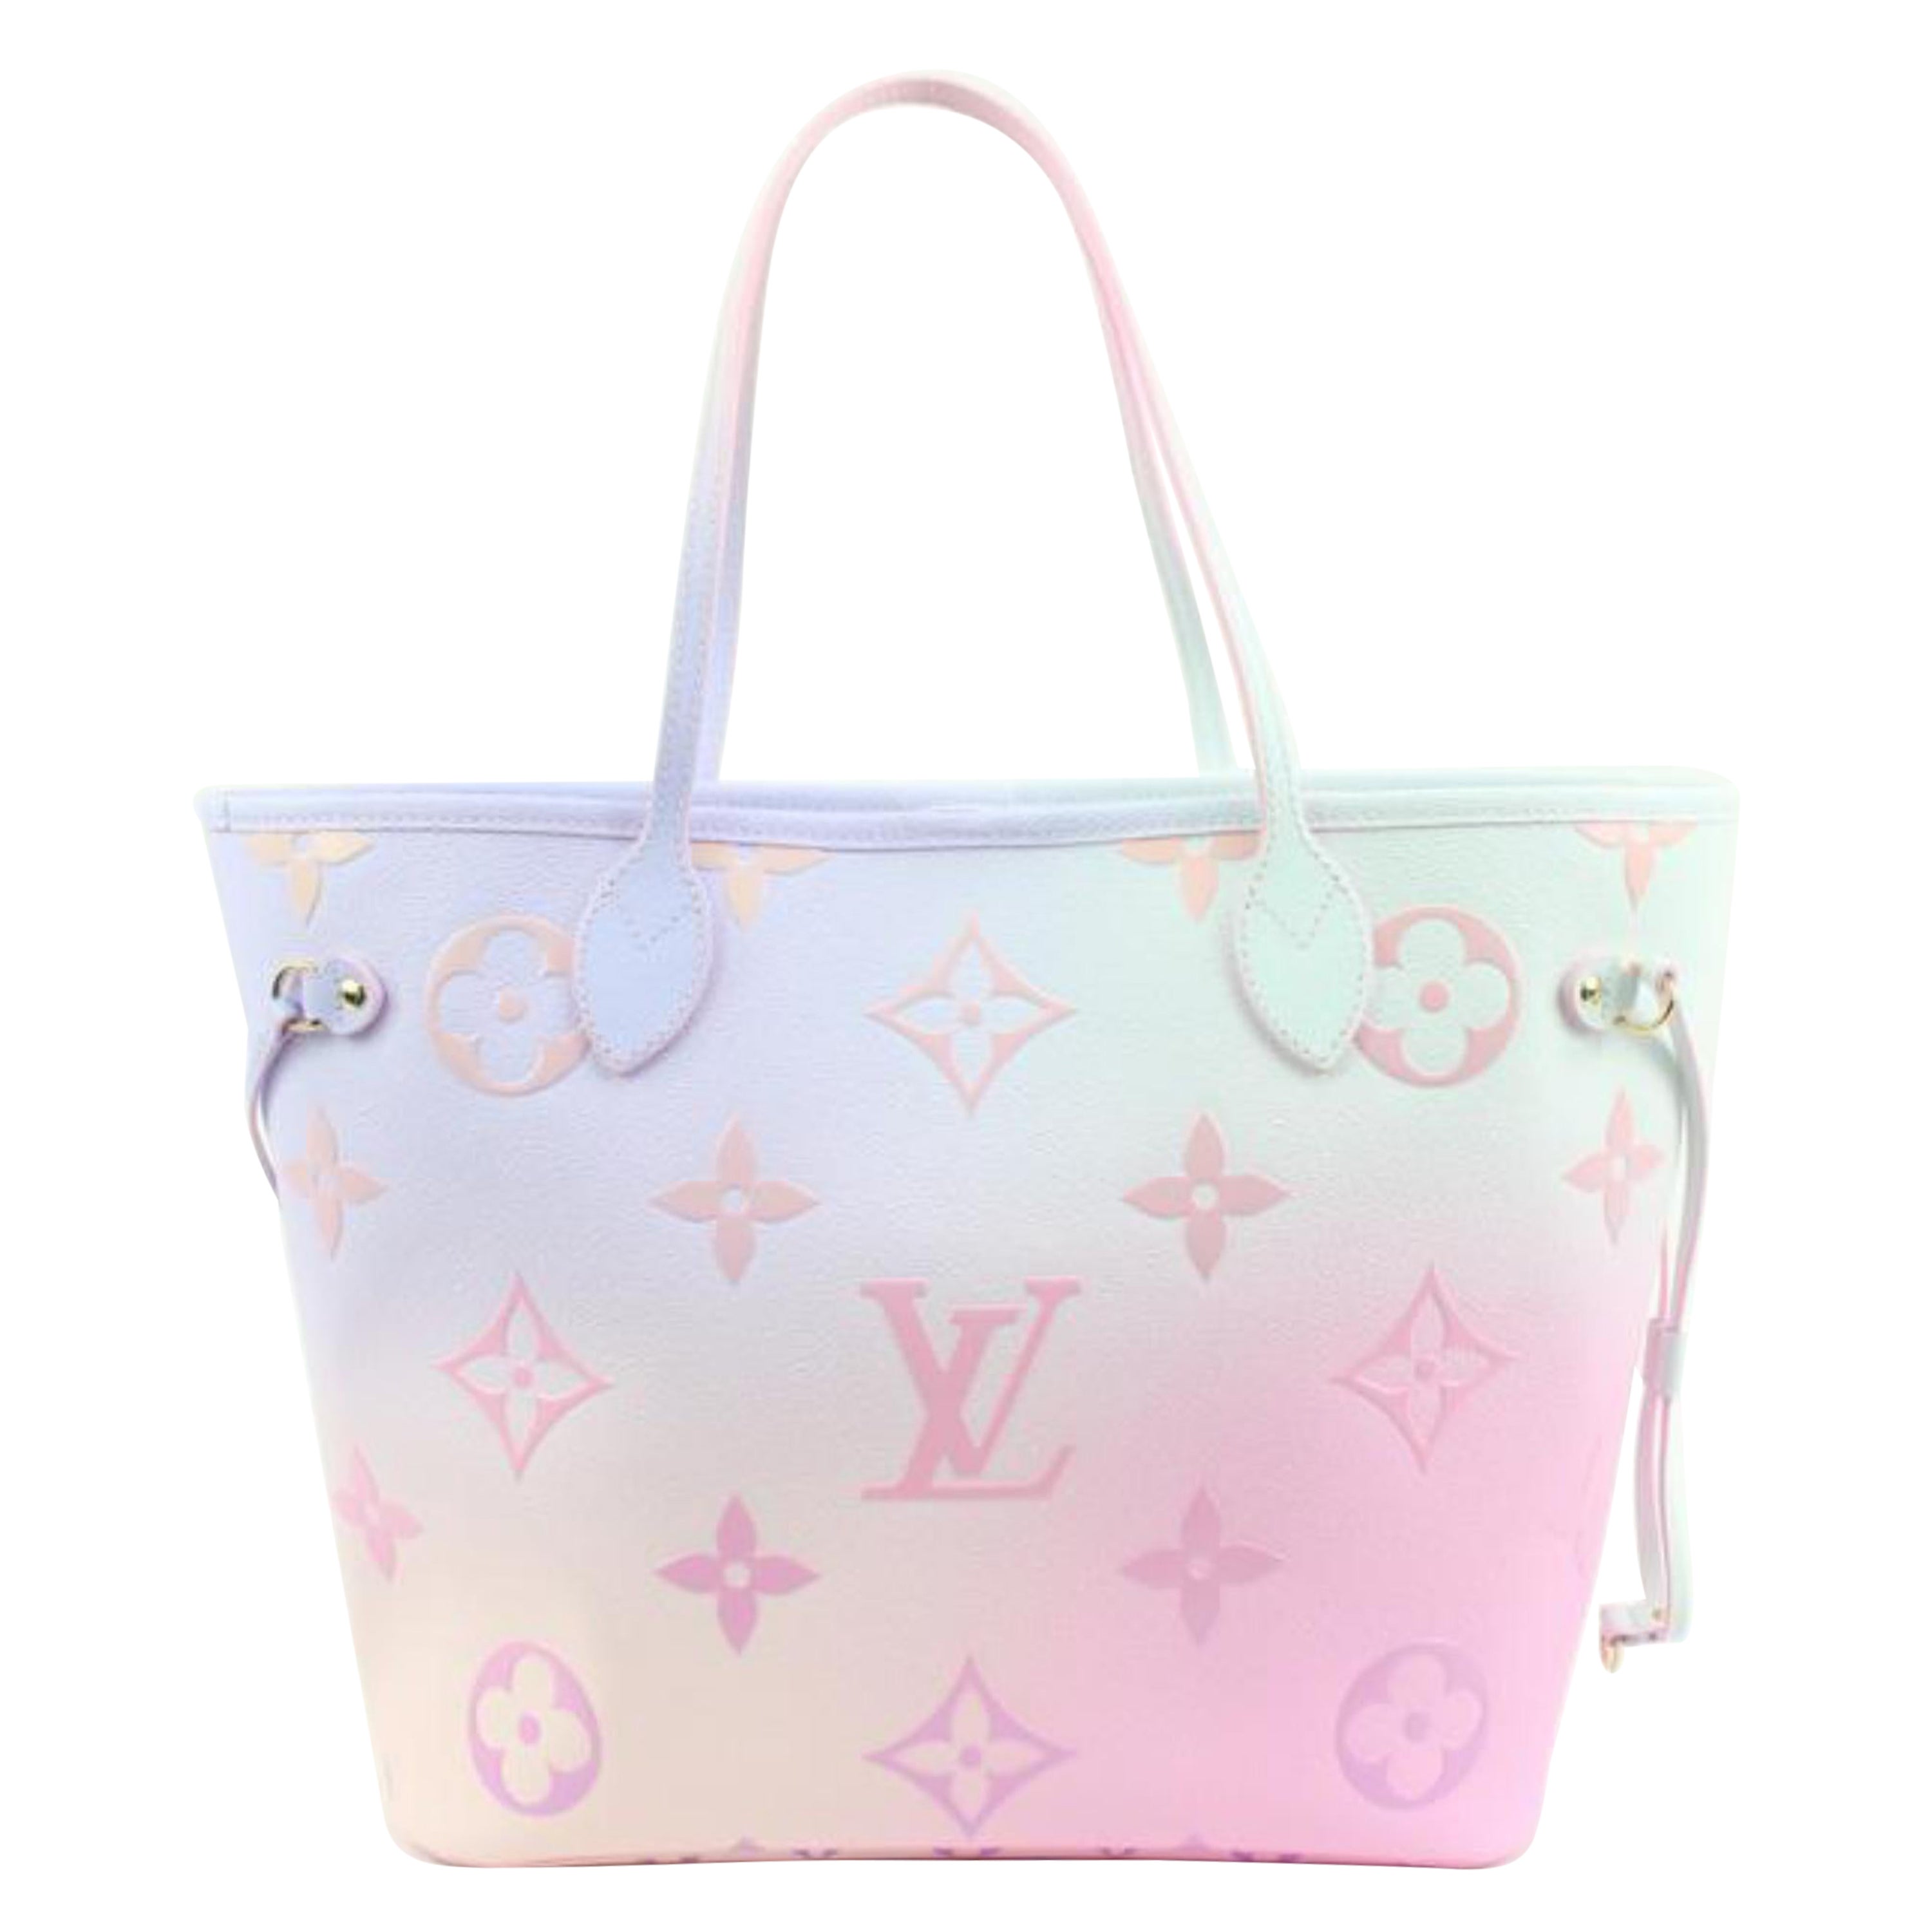 Louis Vuitton Neverfull MM, Sunrise Pastel Color, New in Dustbag